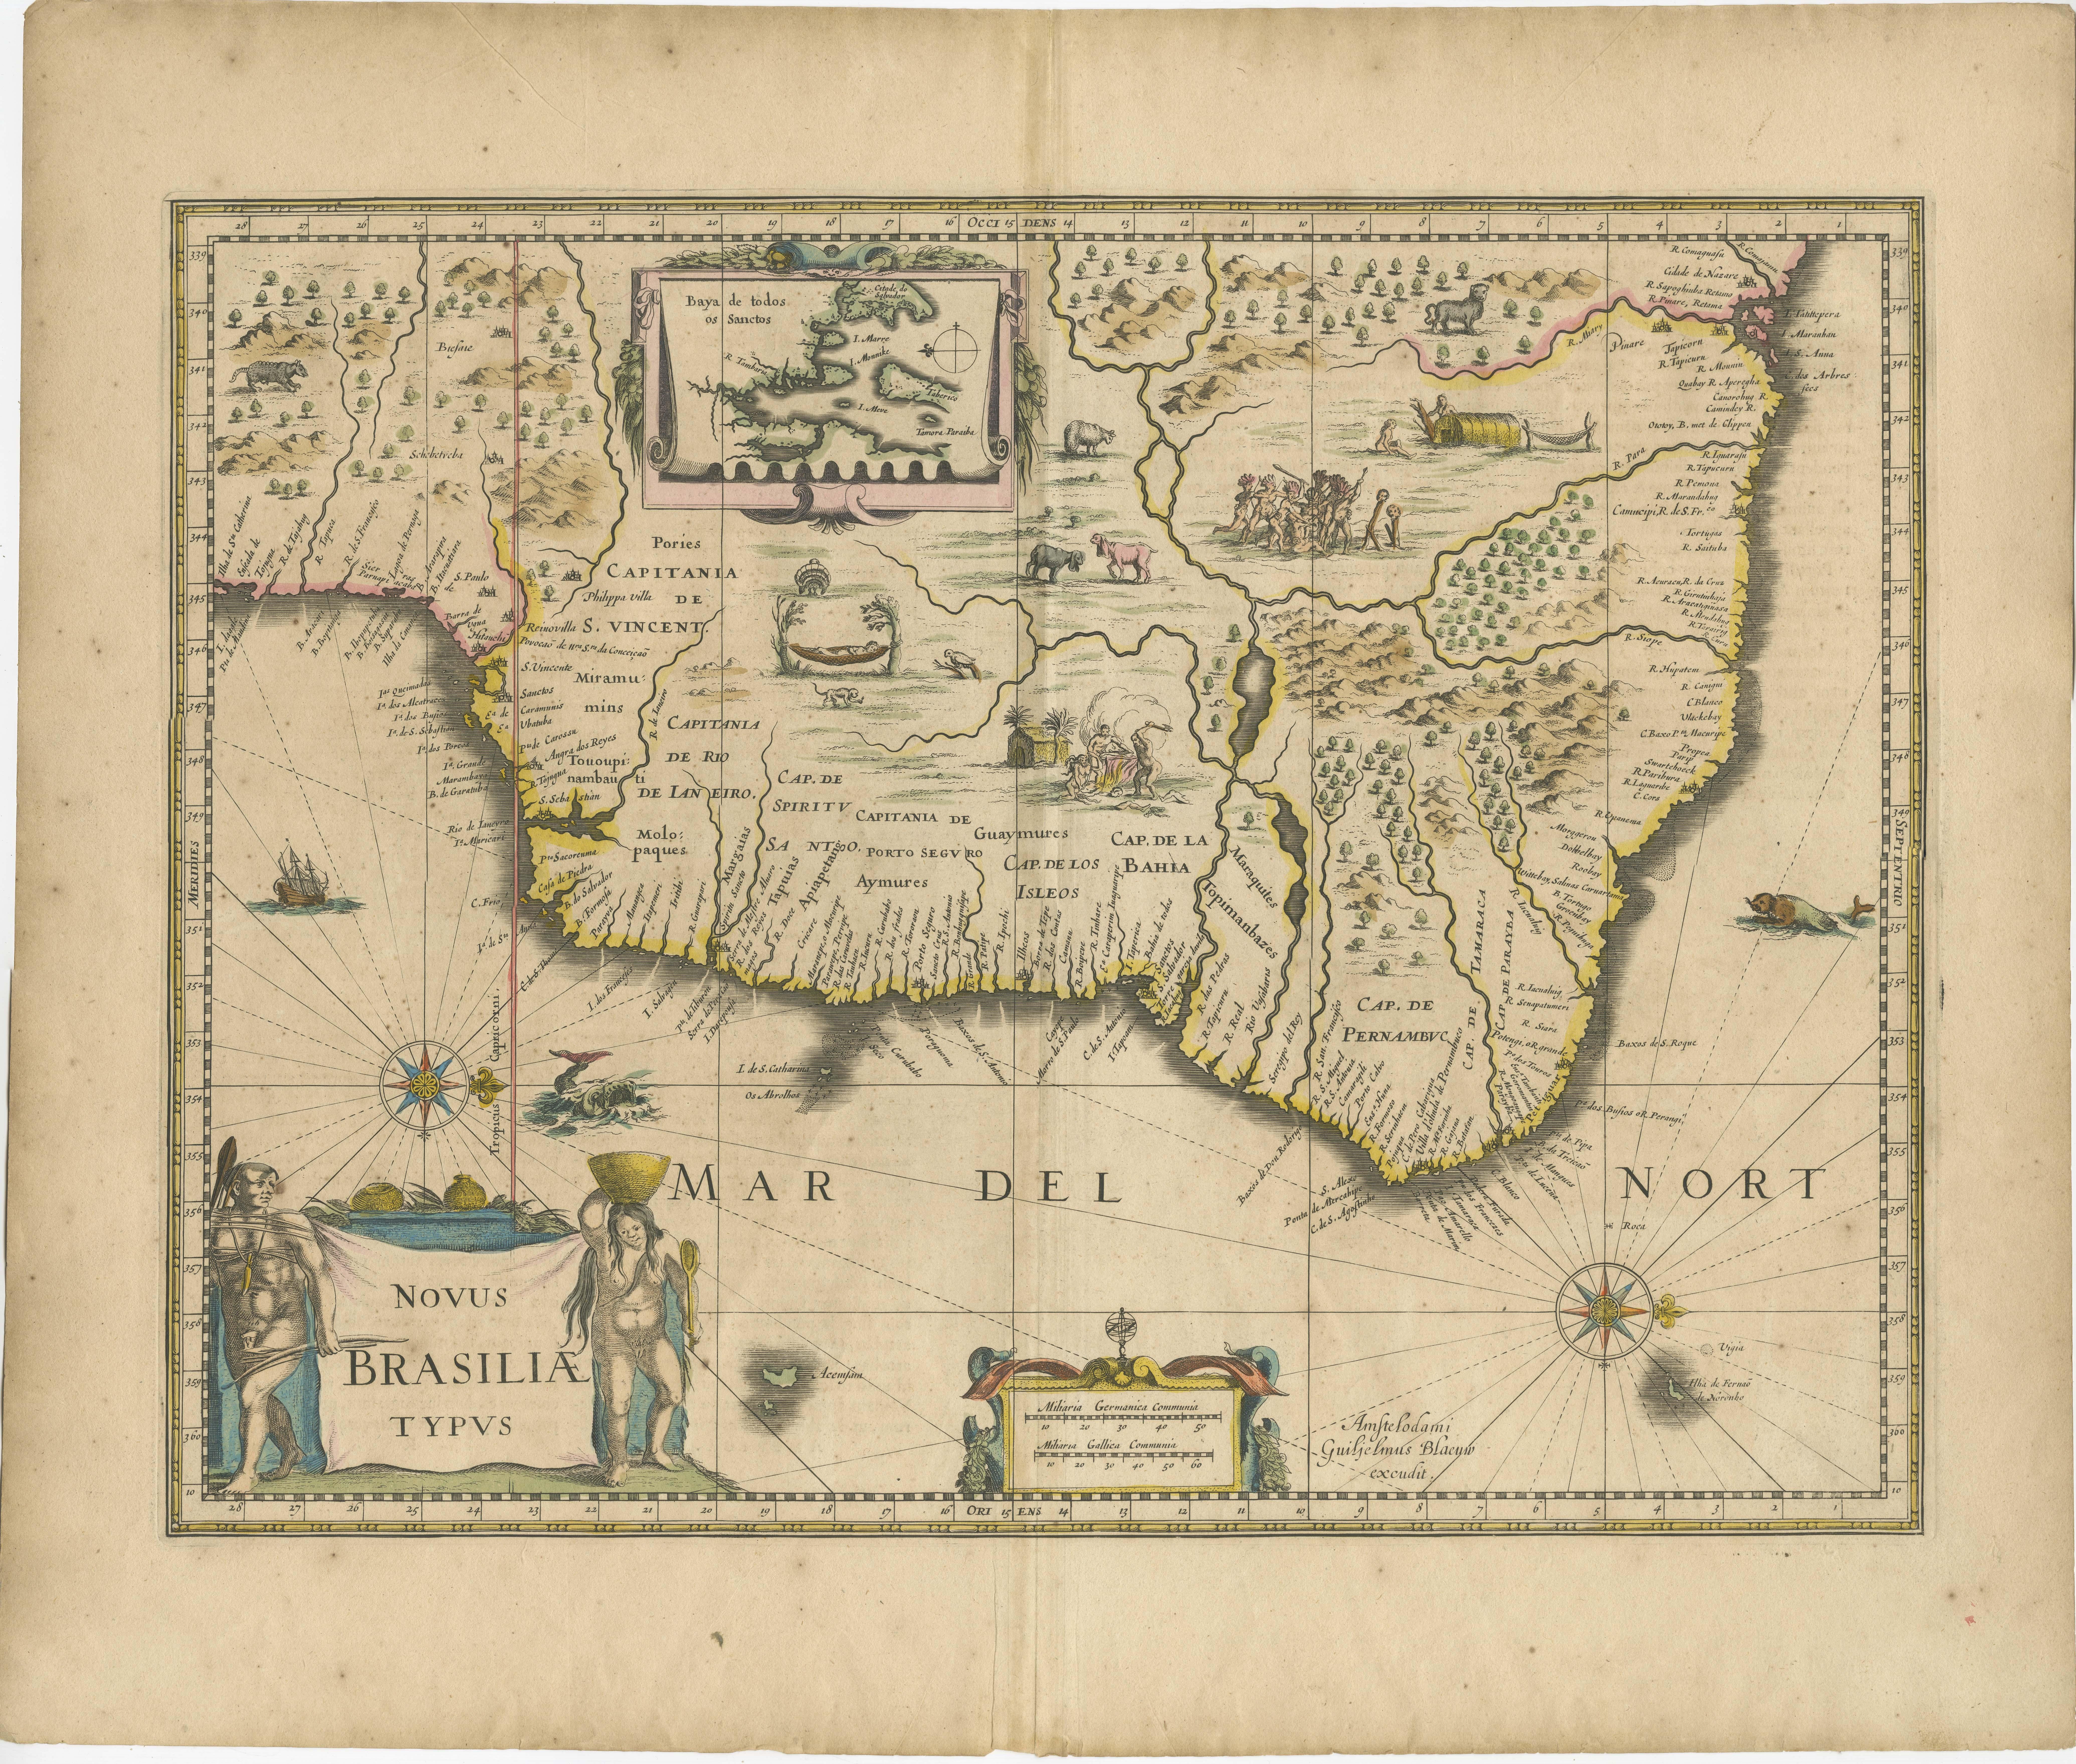 Engraved Old Color Engraving of Blaeu's first Map of Brazil, North Oriented to the Right For Sale